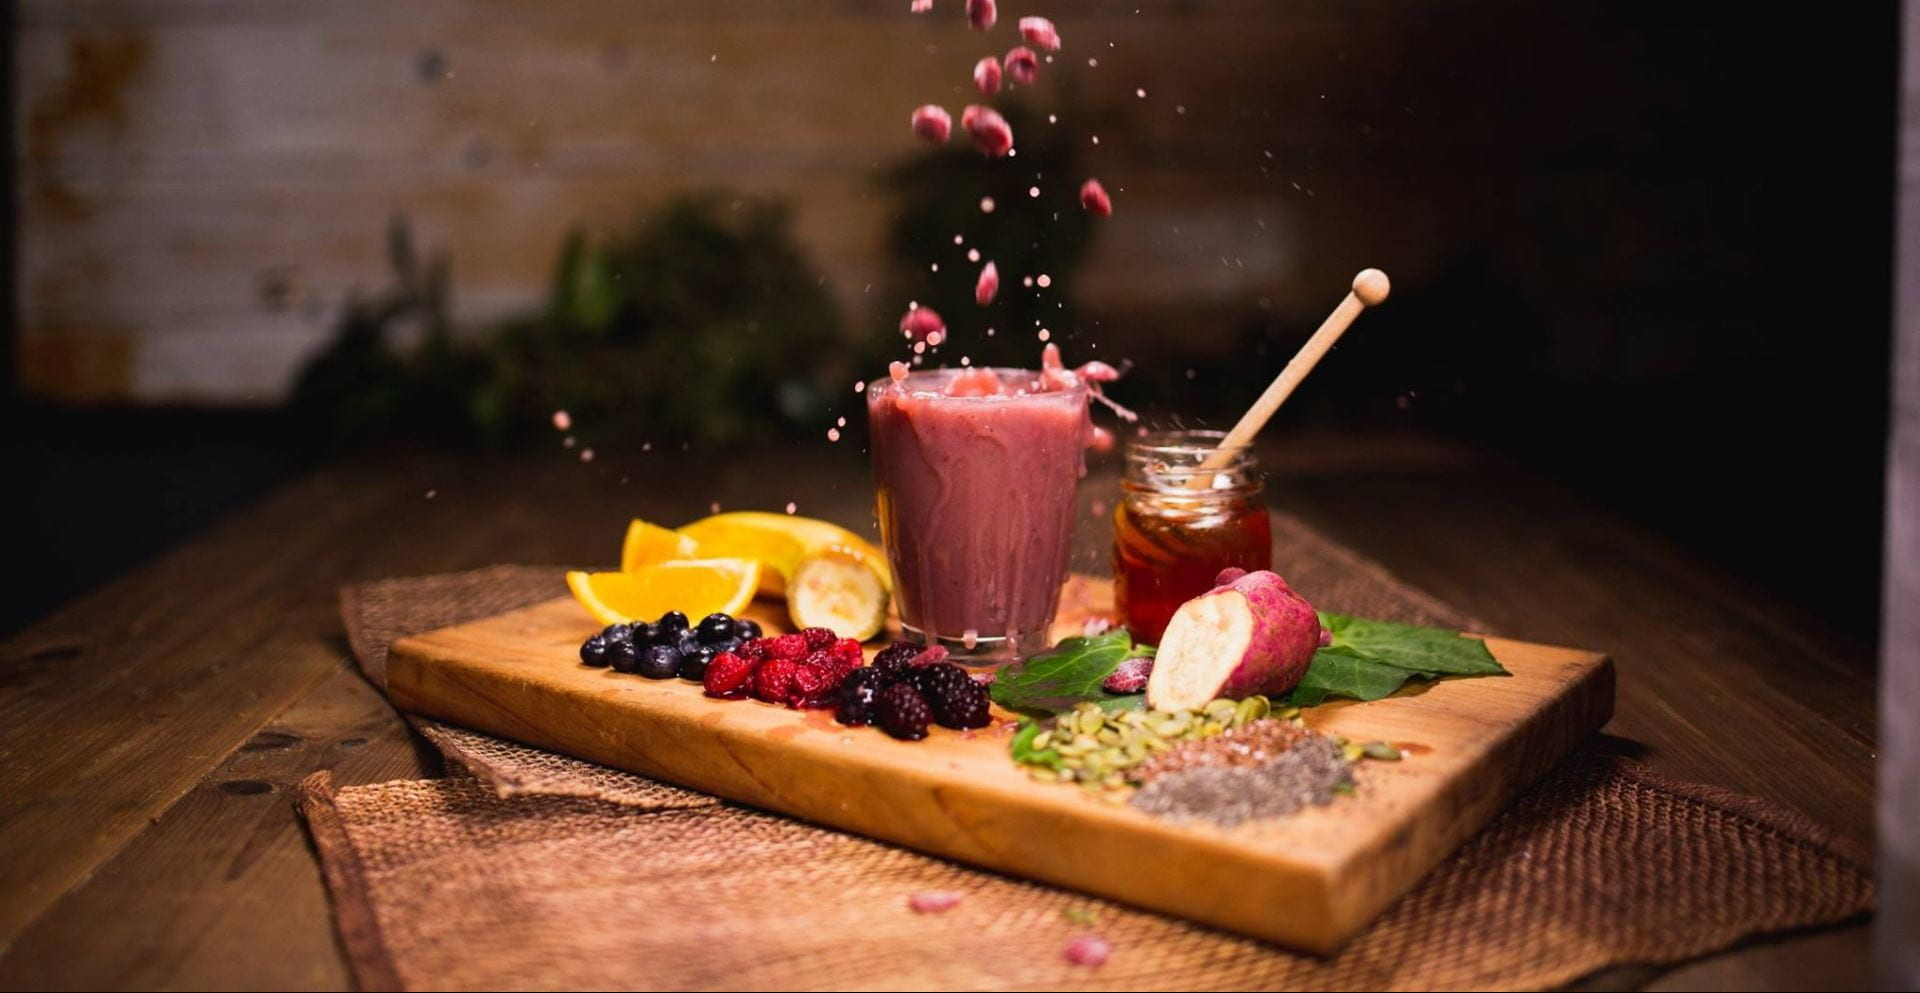 A pink smoothie is a glass standing on a wooden chopping board, alongside a jar of honey, seeds and freshly cut fruit